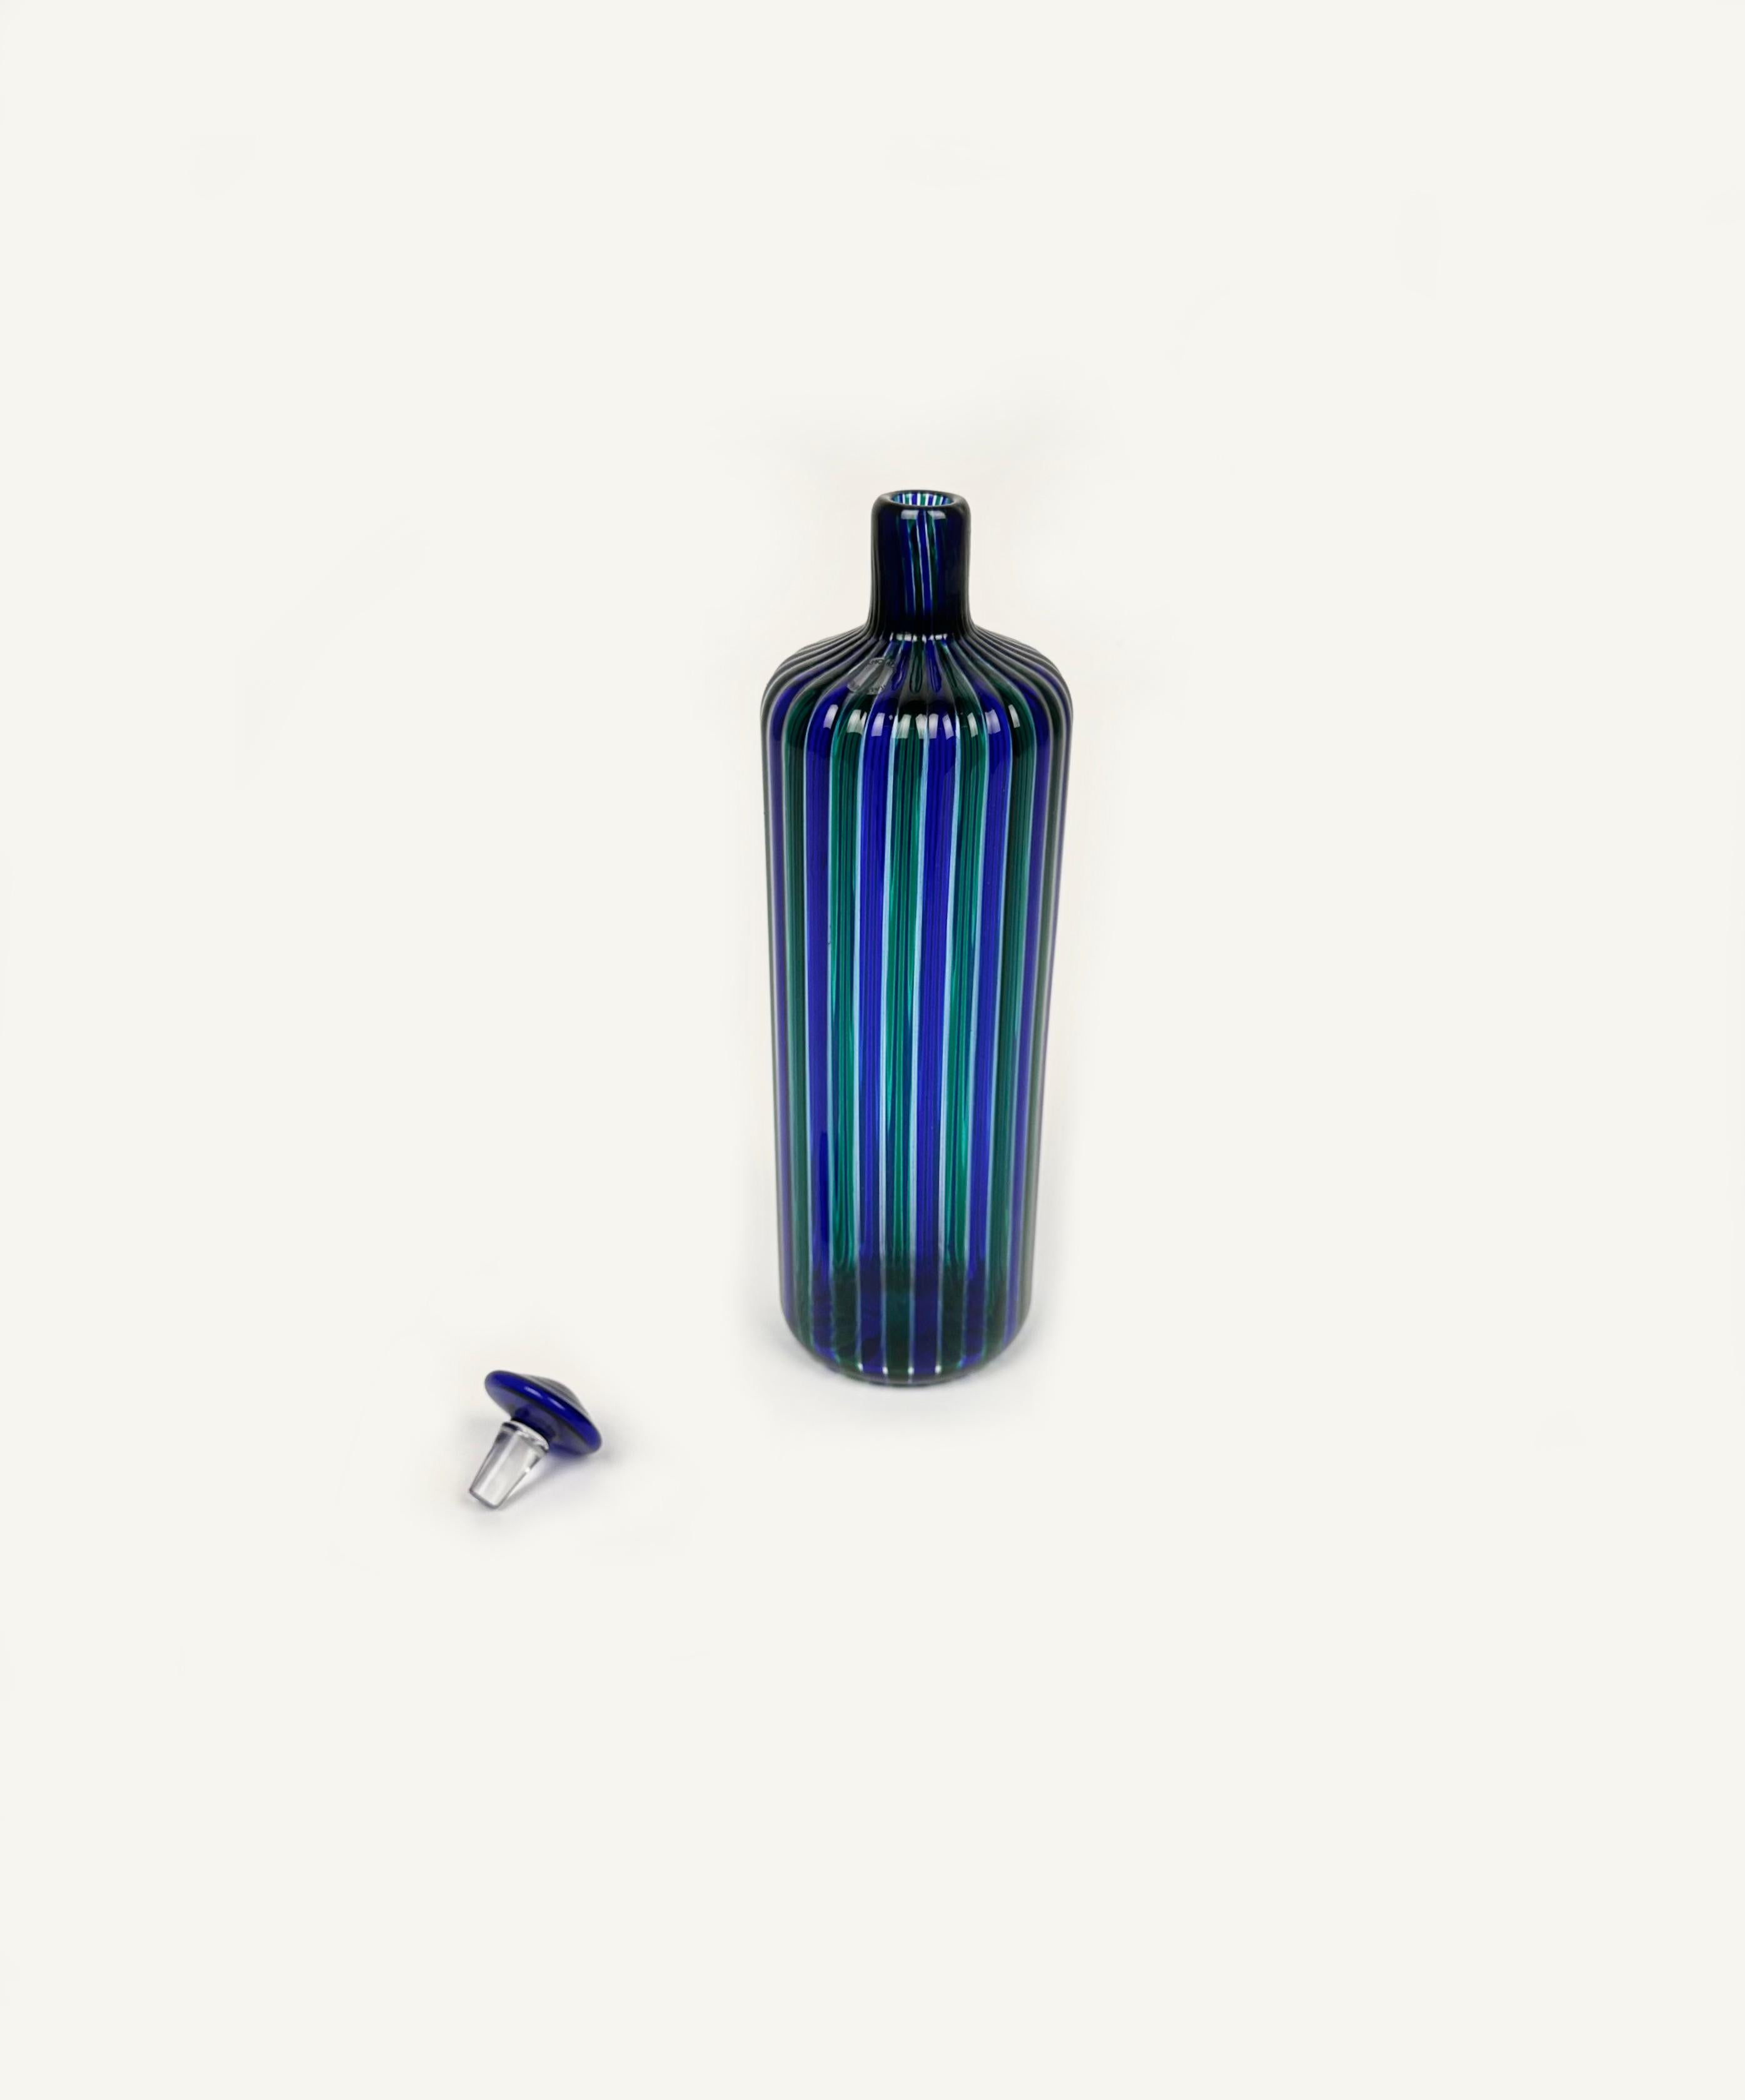 Blue and Green Murano Glass Bottle by Fulvio Bianconi for Venini, Italy 1988 For Sale 1